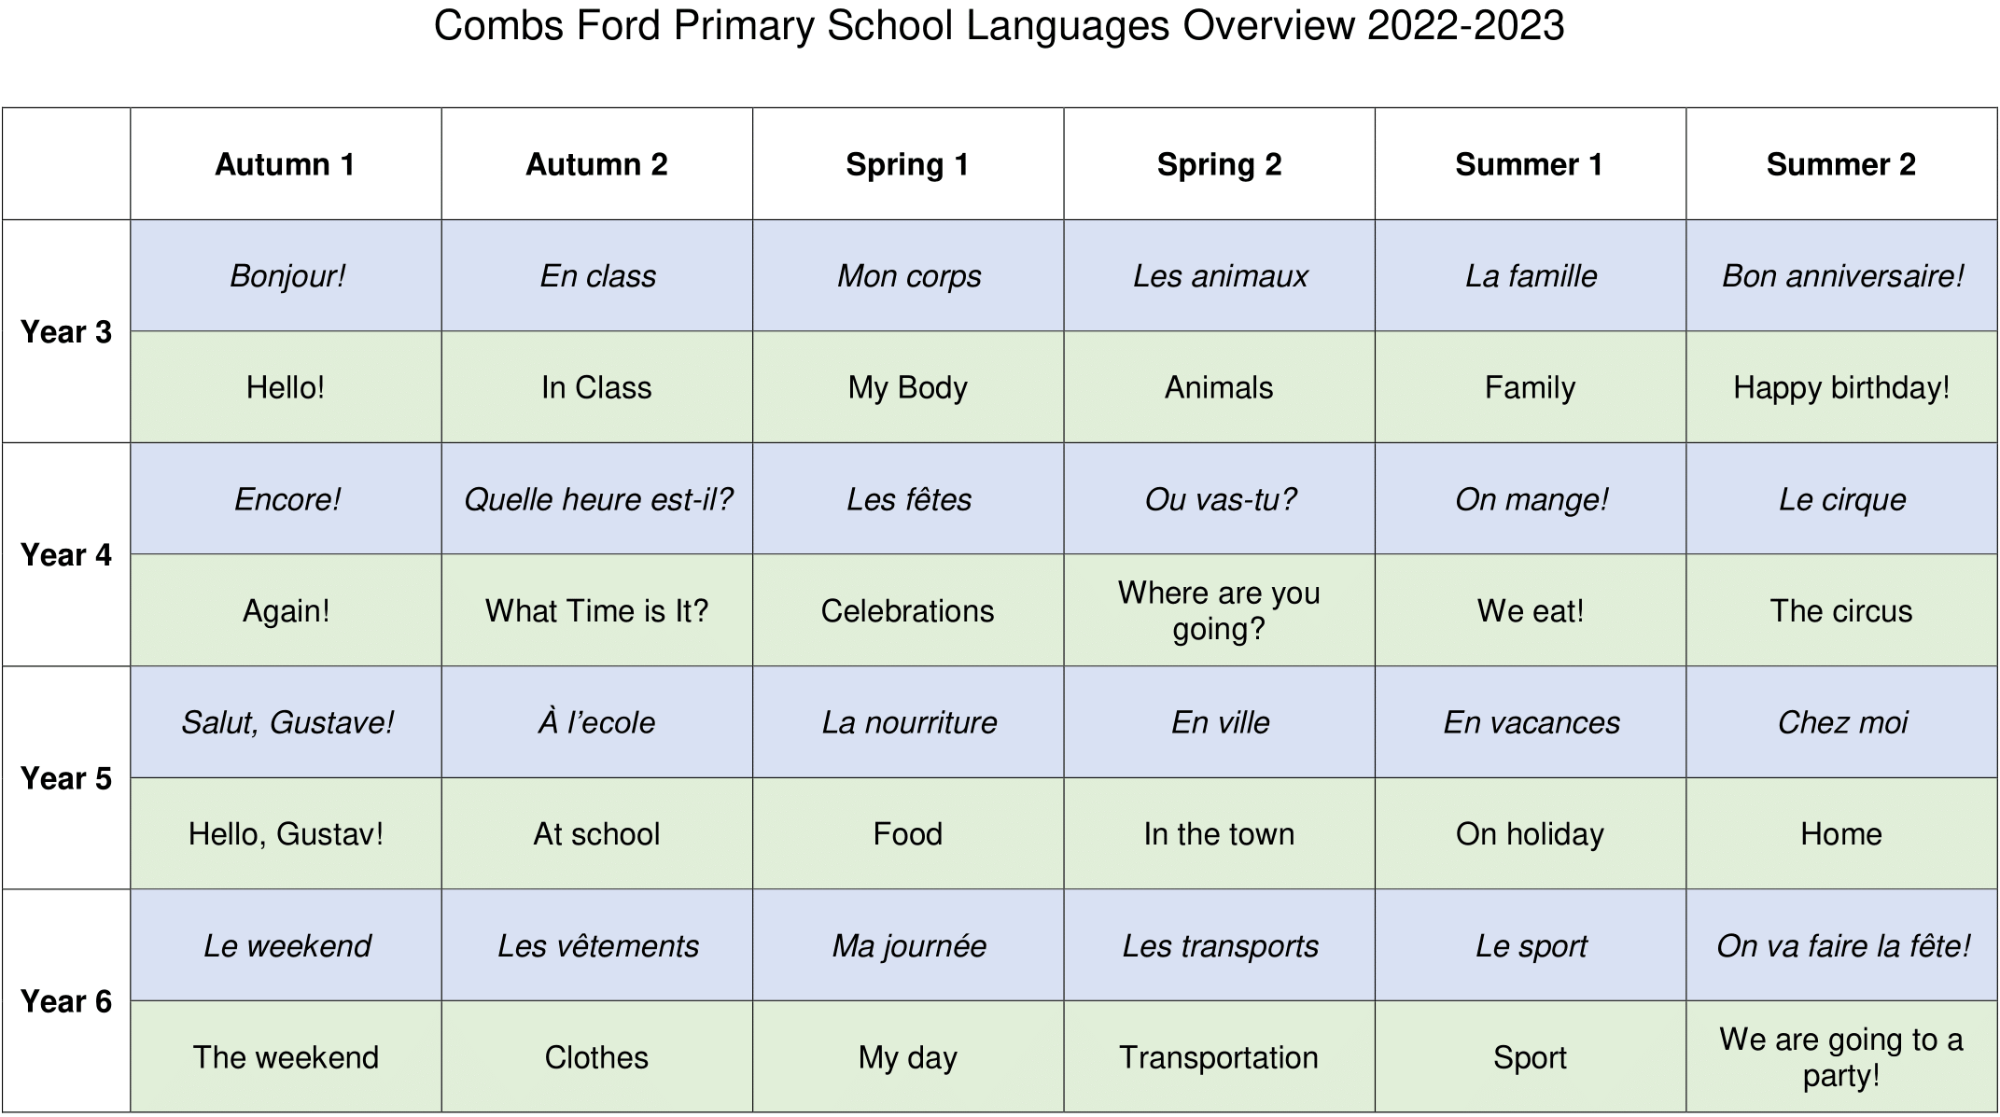 Overview of Combs Ford Primary School's French Curriculum (2022-2023).